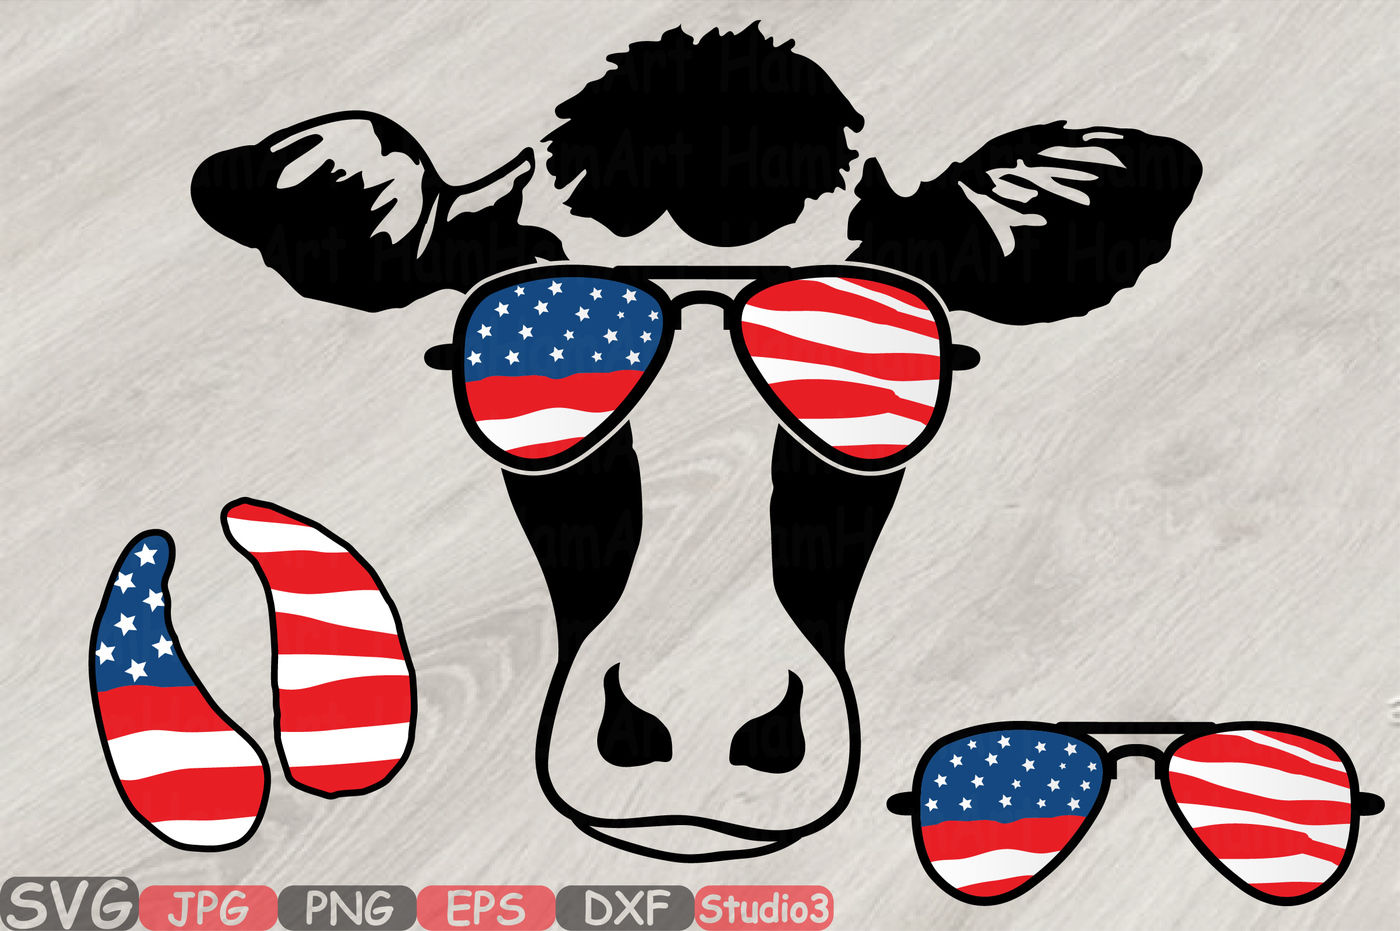 Download Cow USA Flag Glasses Silhouette SVG cowboy western 4th ...